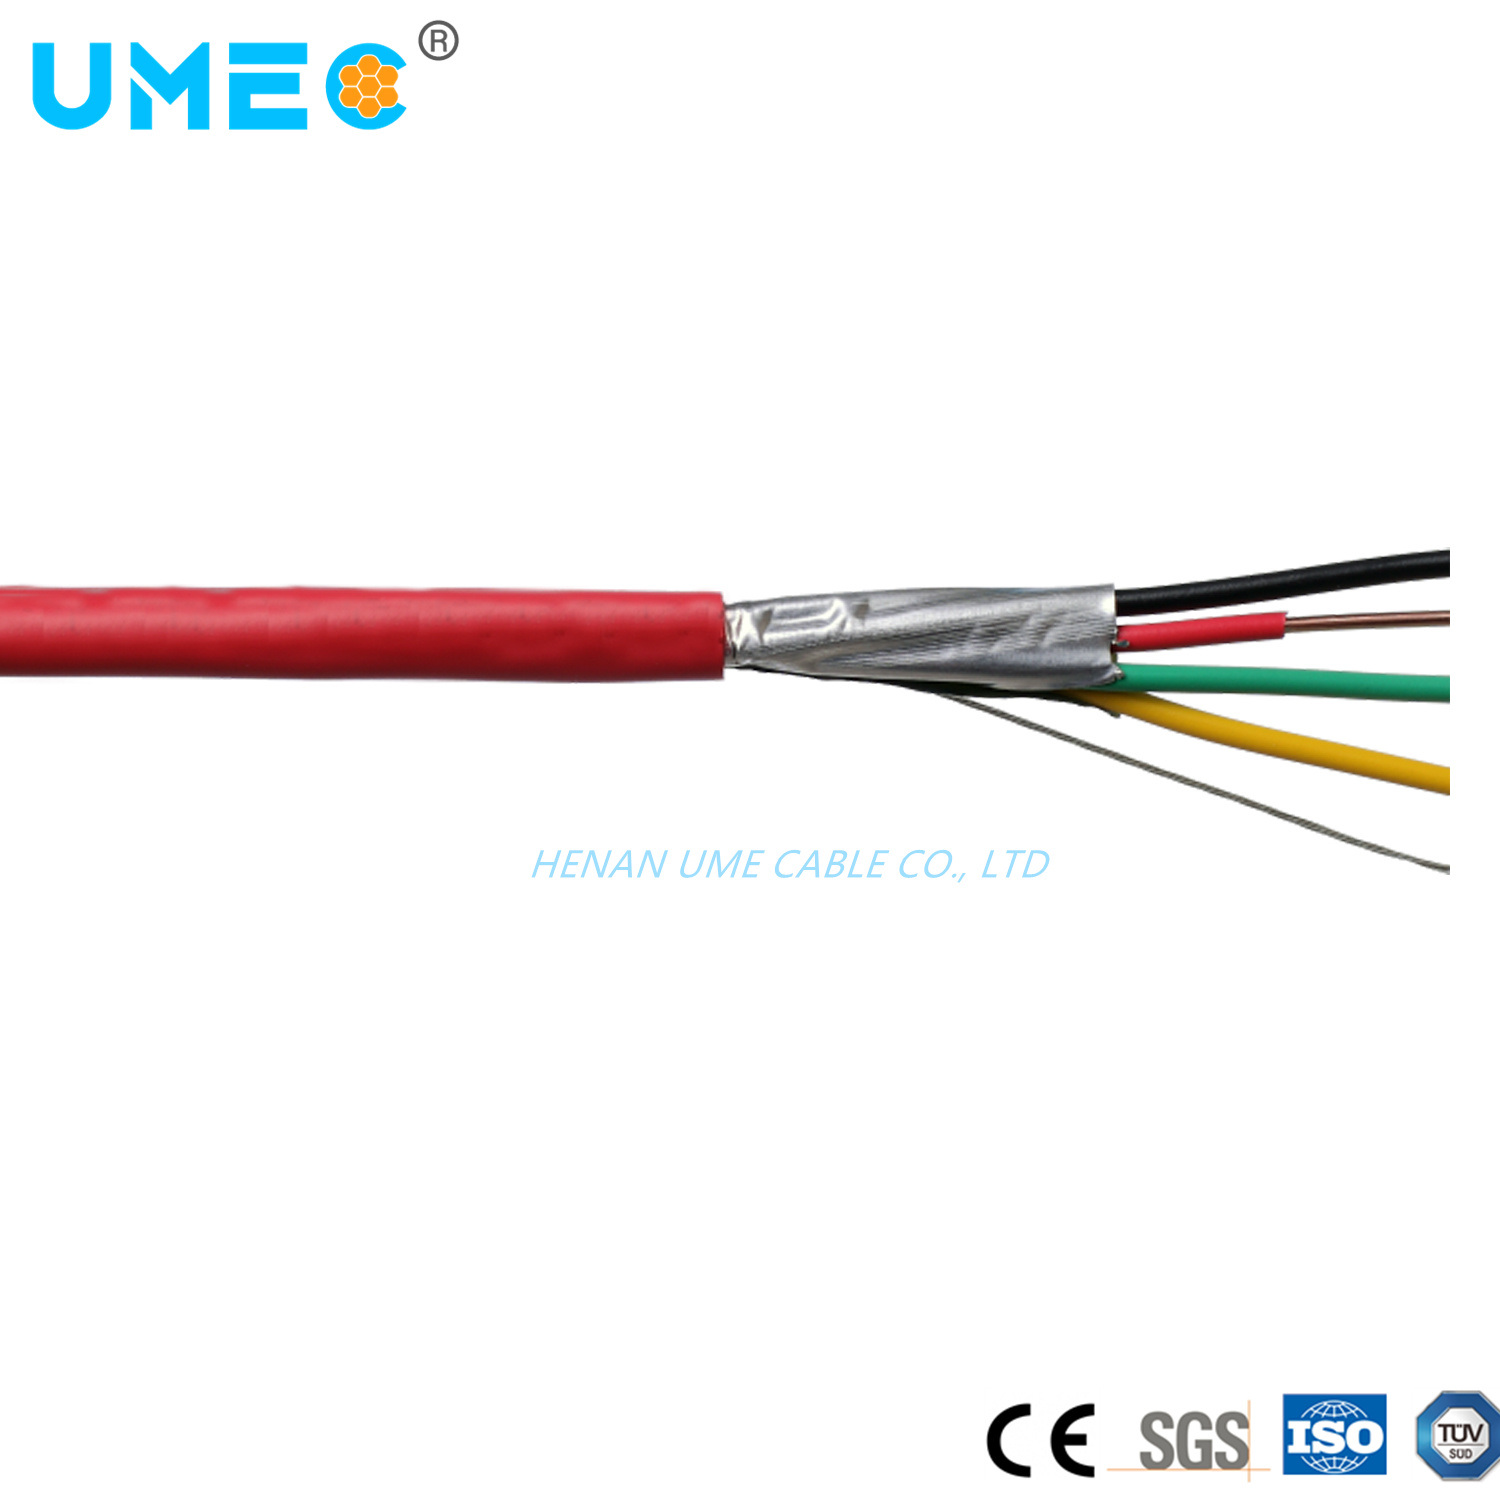 300V 4X1.0 2X1.0 2X2.5 2X1.5mm2 Fire Alarm Cable Fplr PVC for Smoke Detectors Cable Wire